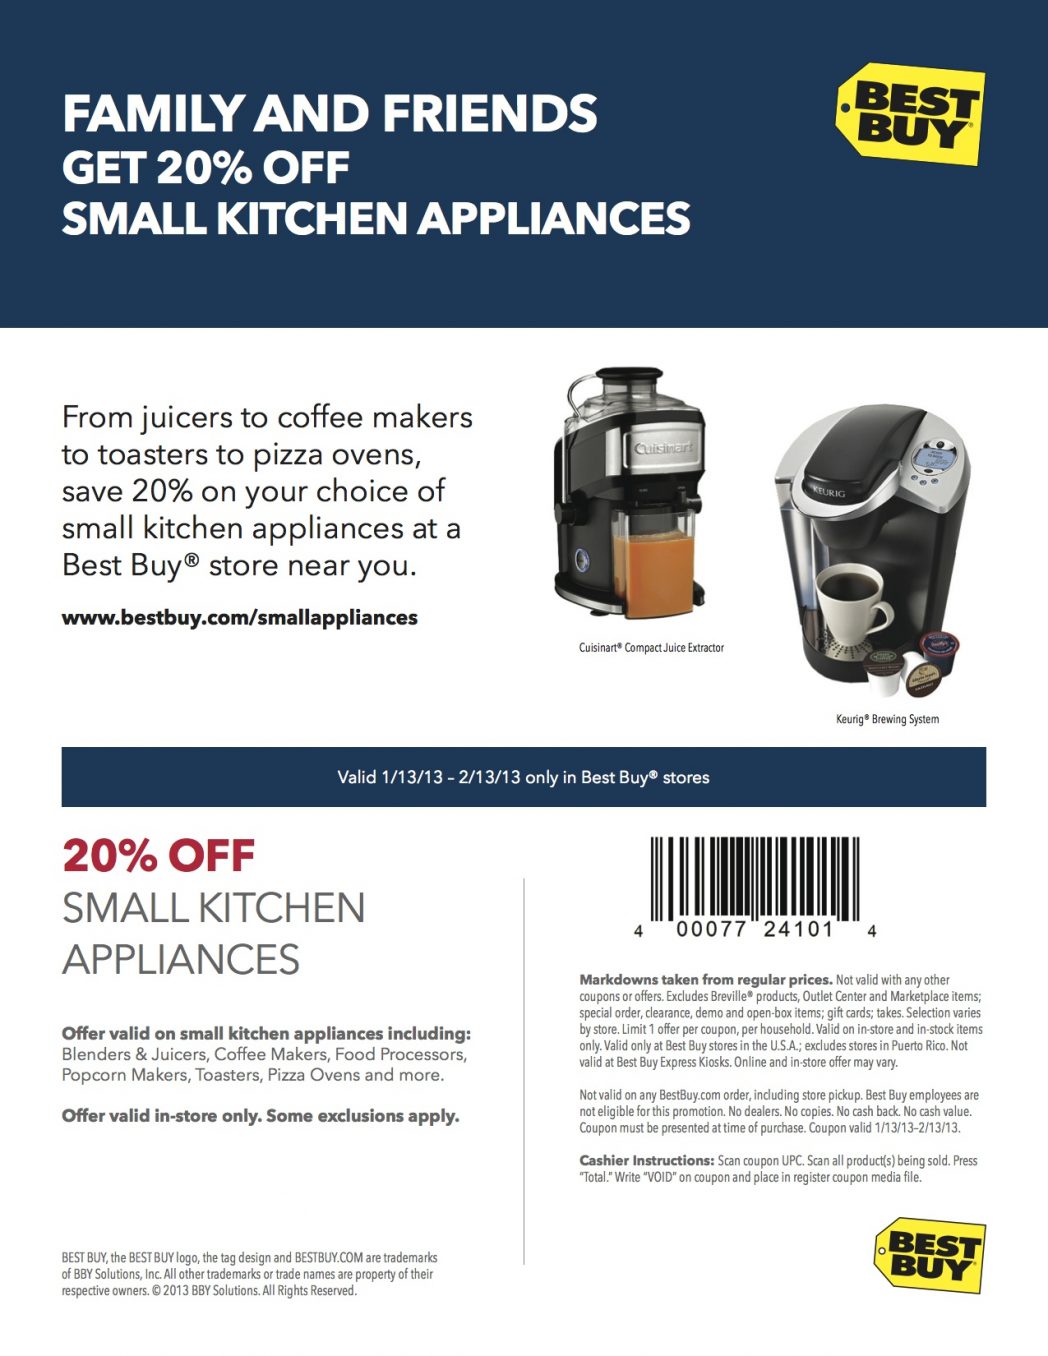 https://www.the-mommyhood-chronicles.com/2013/01/doing-my-small-appliance-shopping-at-best-buy-this-winter/bestbuy_coupon_2013jan-smallappliances_v2-1/